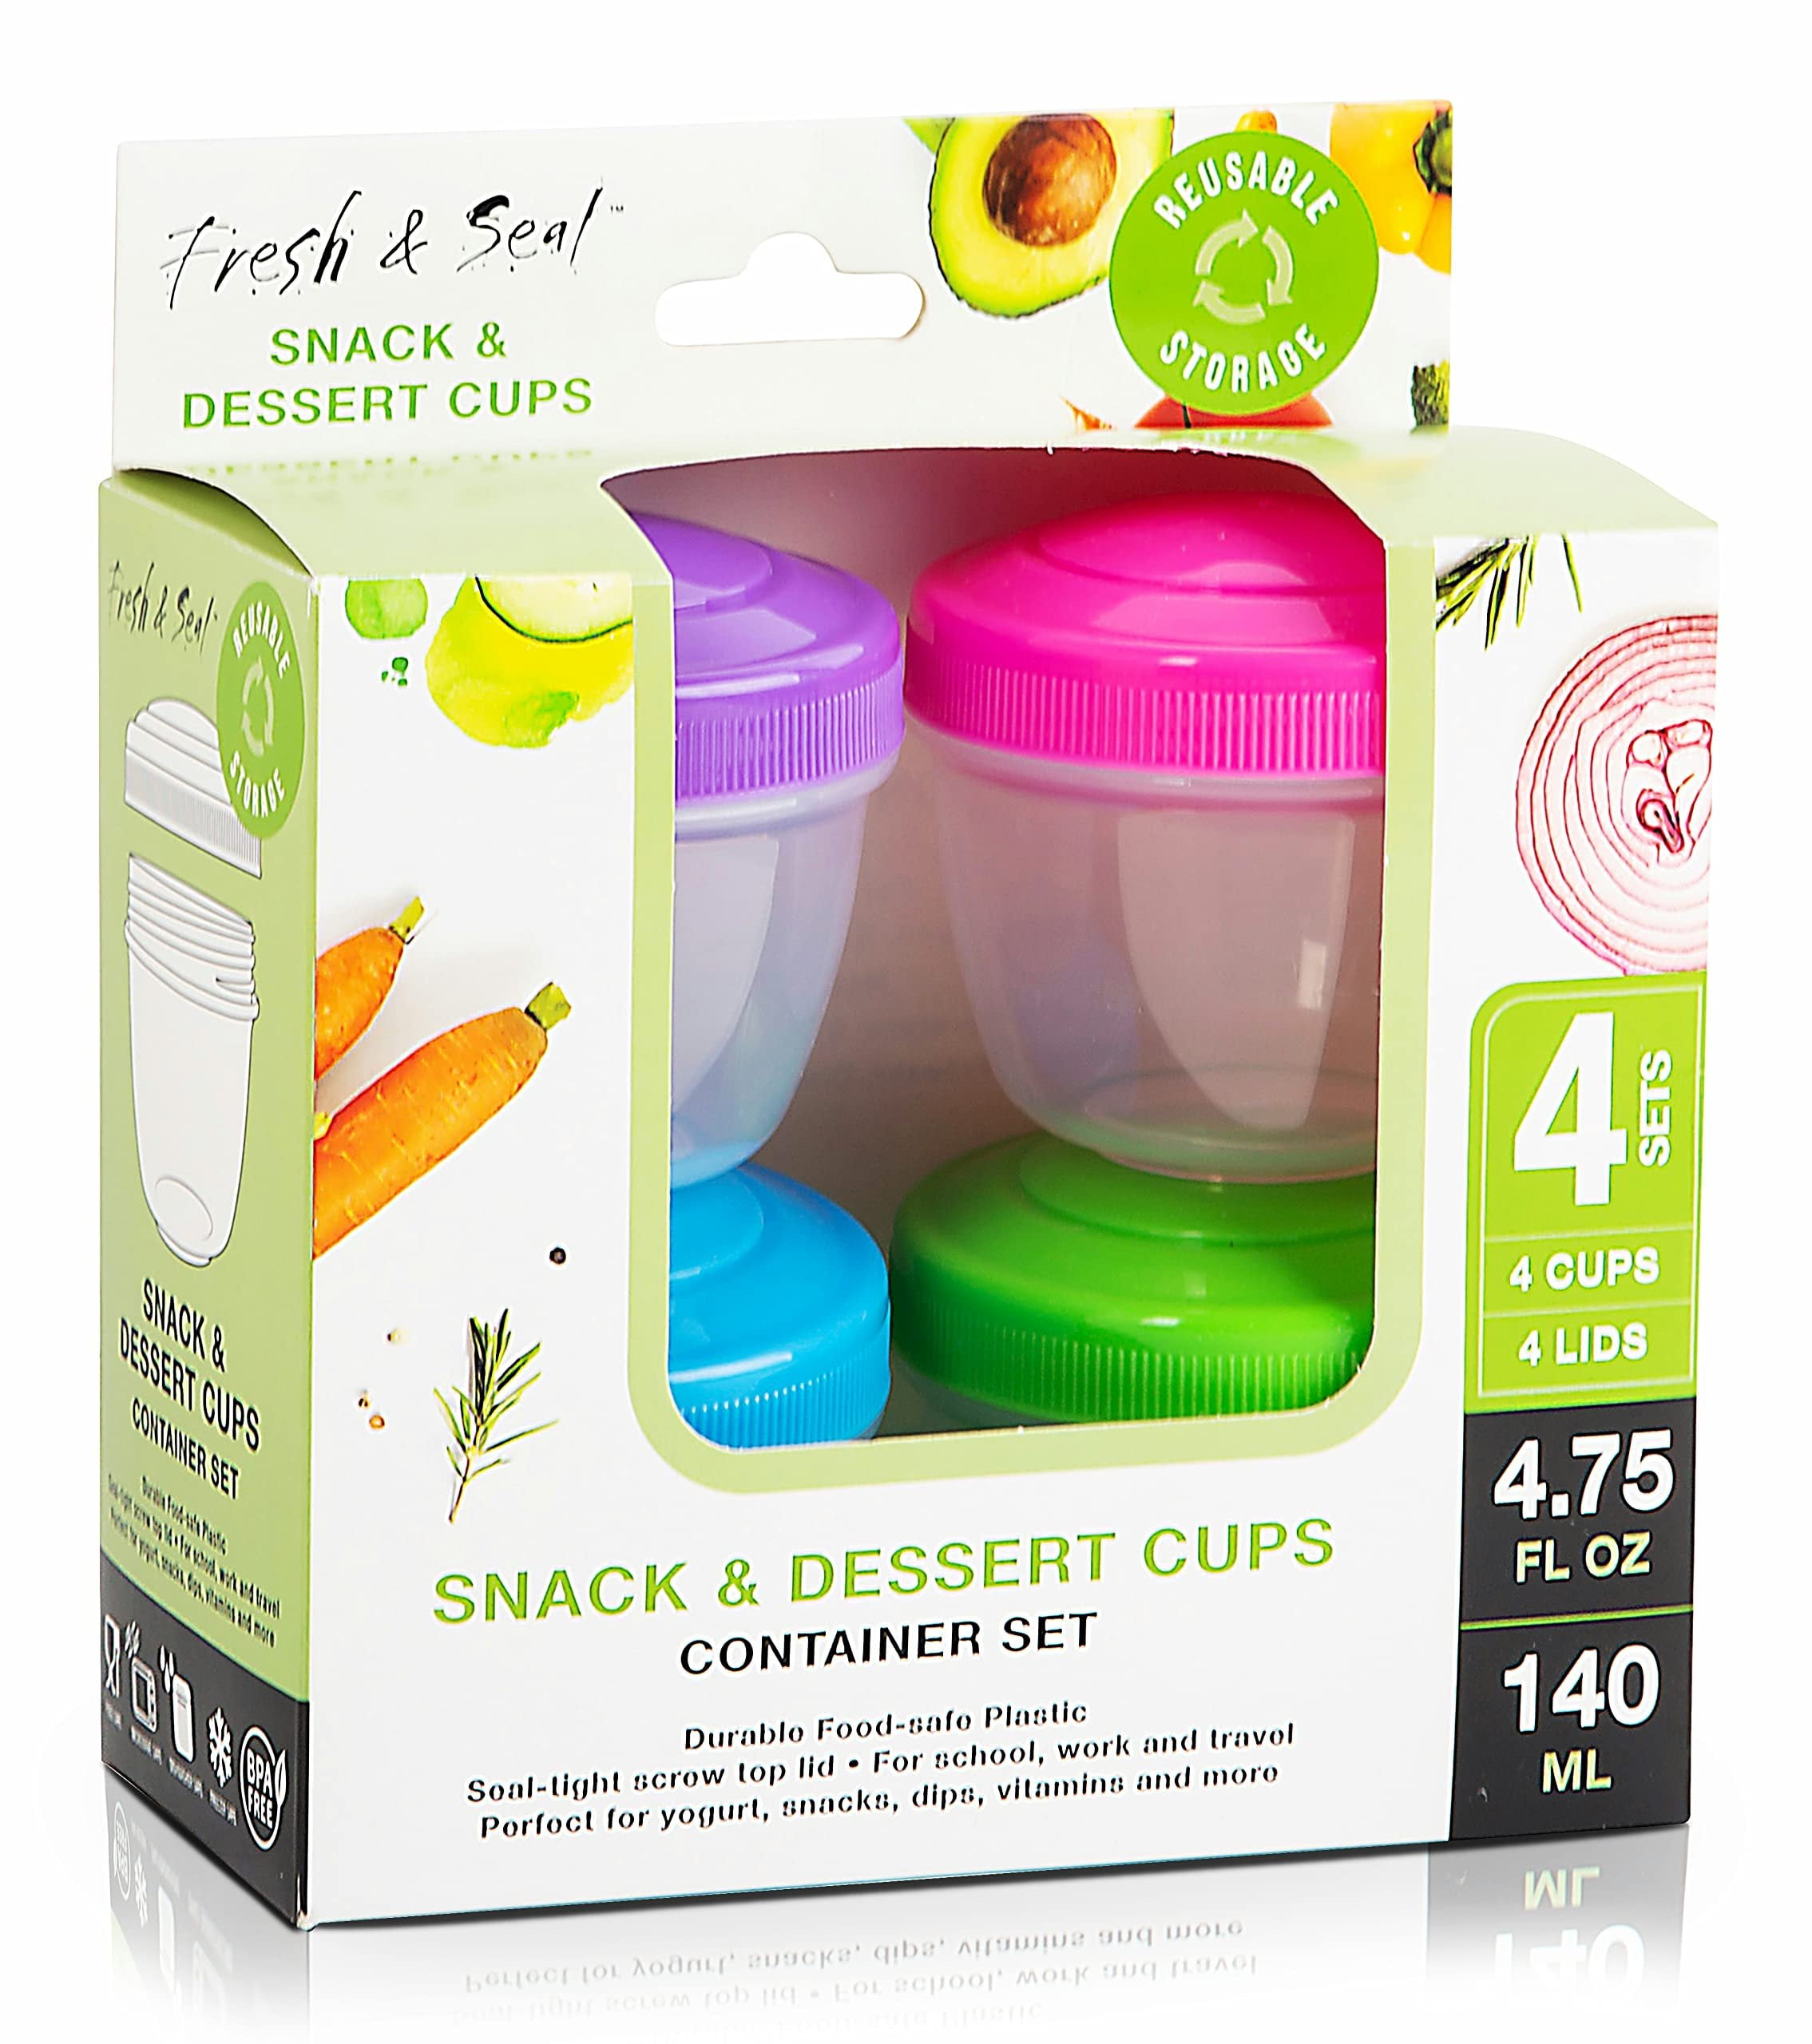 MosJos Snack Containers (4 Set) - 4.75 oz Small Food Storage Cups with Lids - Fruit, Nuts, Sauce, Condiments, Salad Container for Lunch Box - Reusable